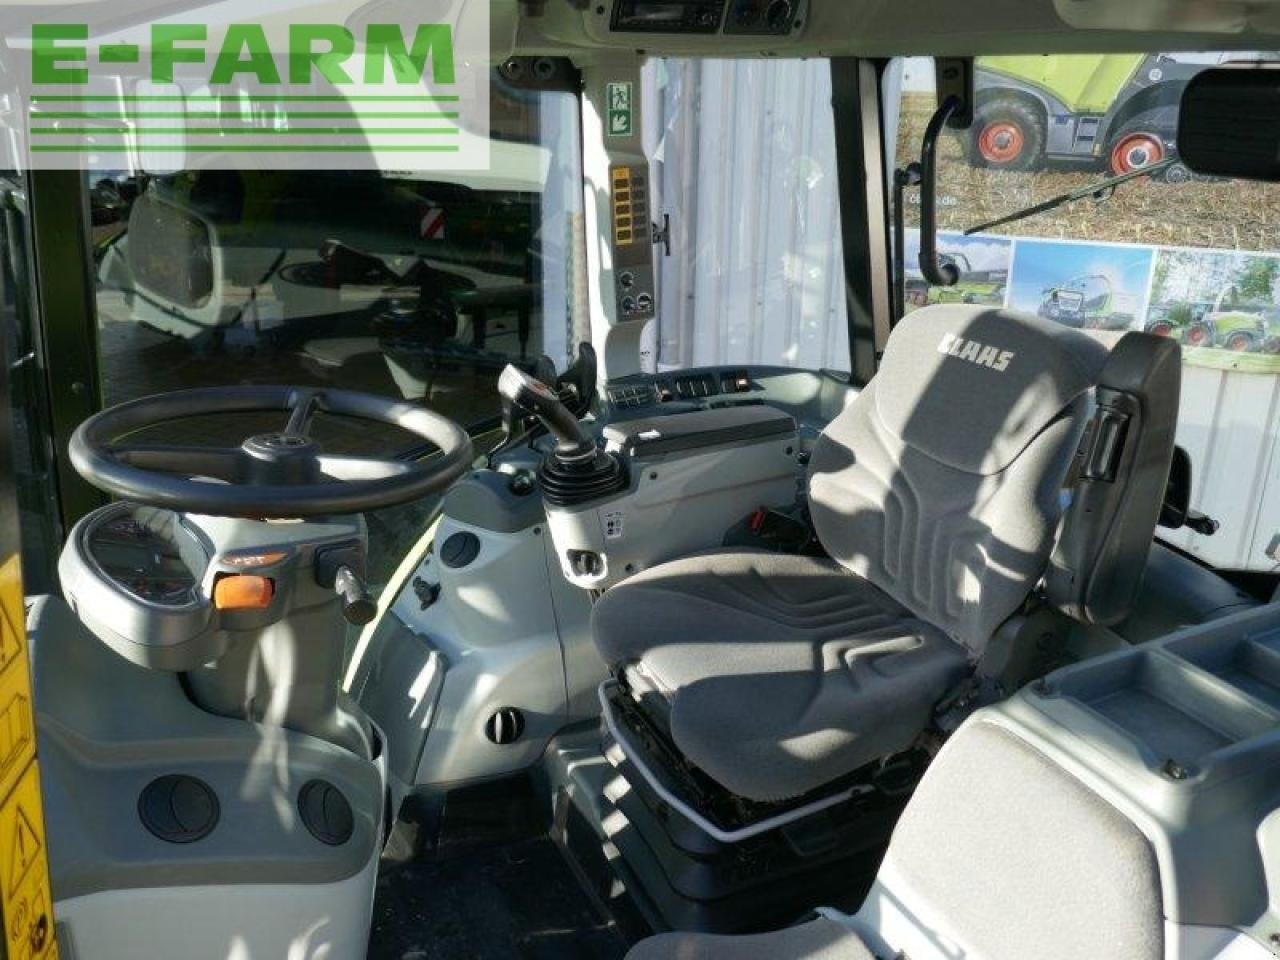 Farm tractor CLAAS arion 420 panoramic